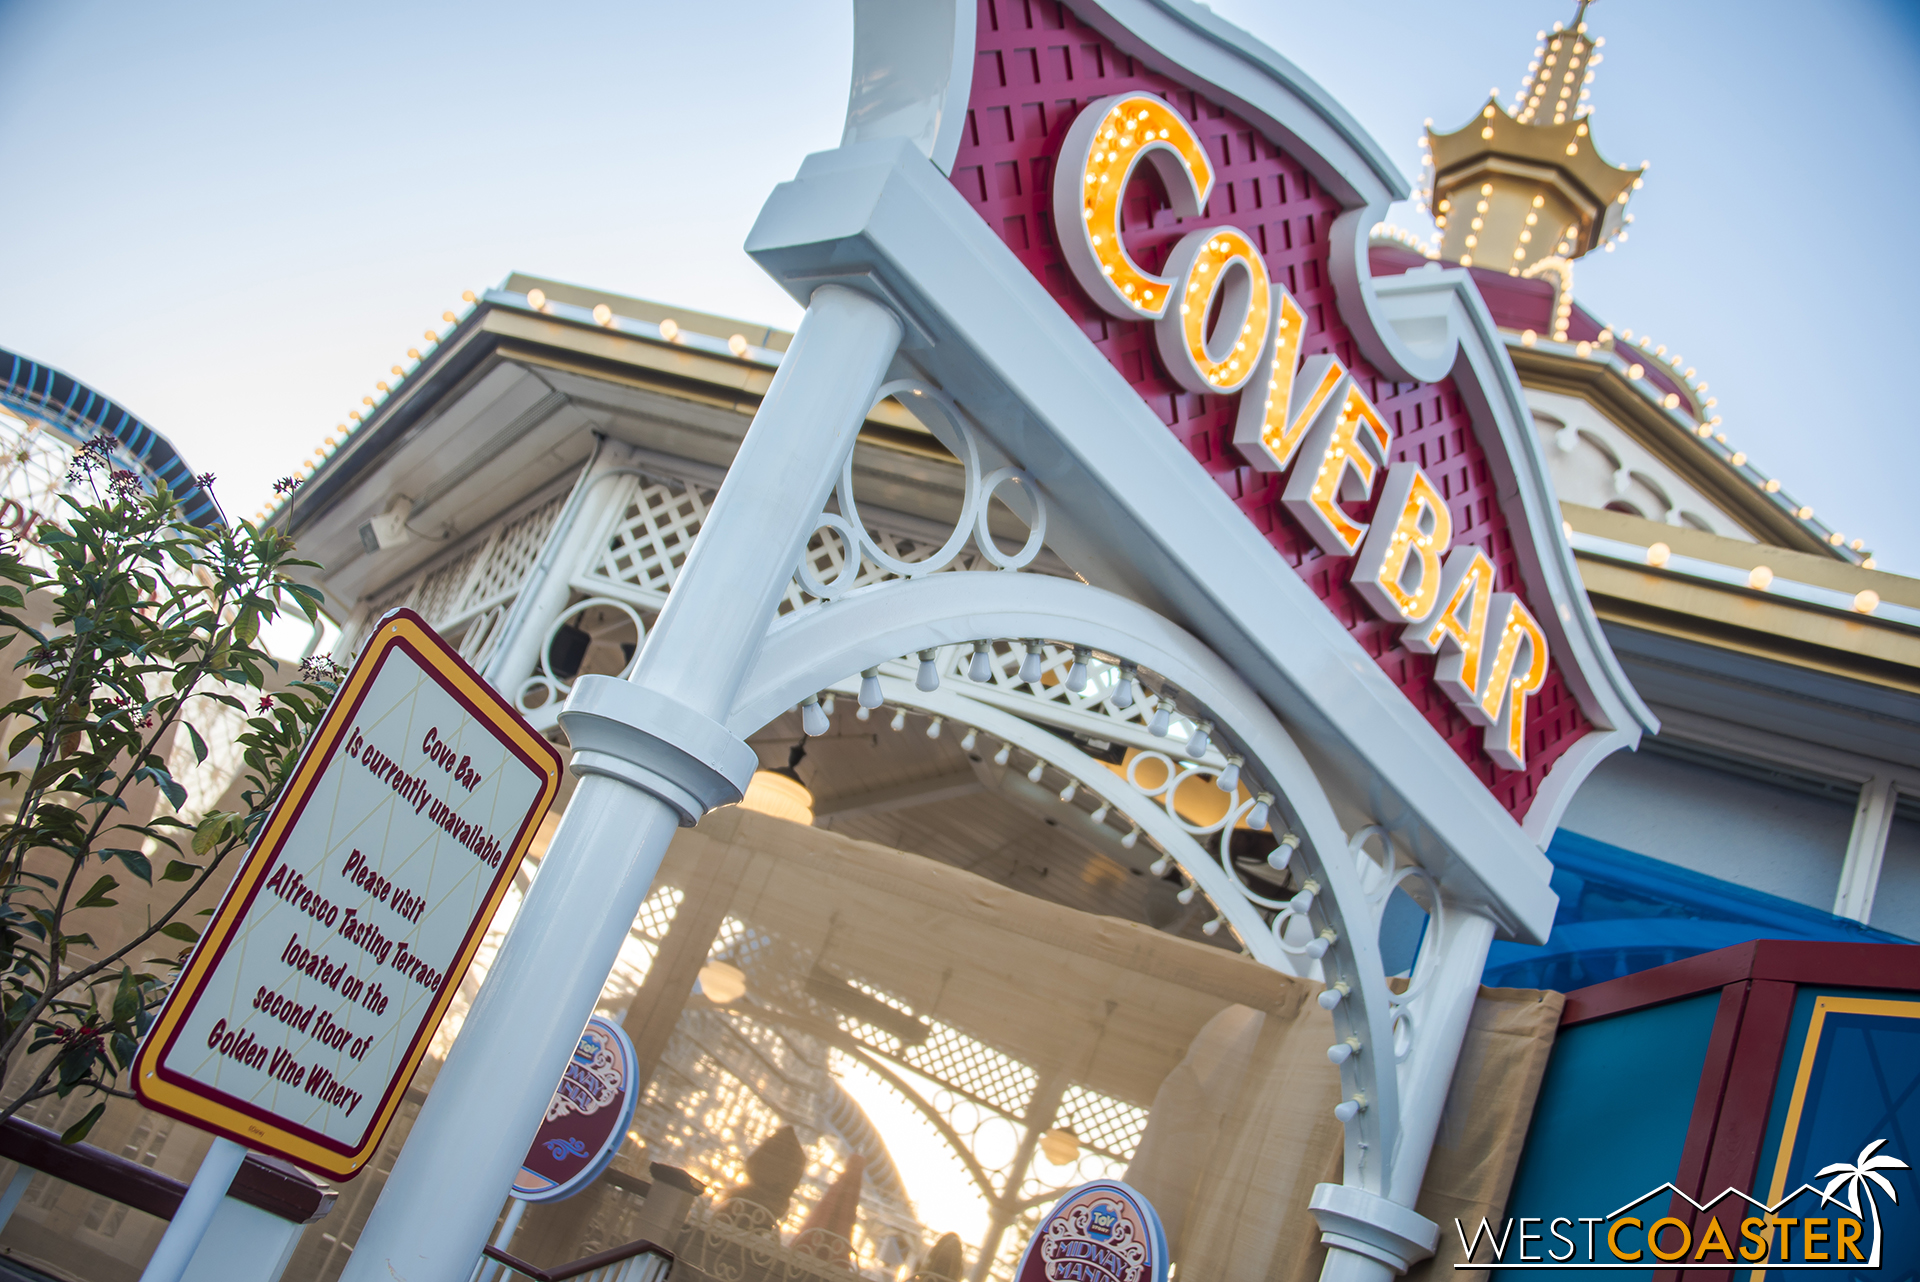  Teleporting back to the "main" entry into the future Pixar Pier area, here's Cove Bar again.&nbsp; Fear not, to any Disney Drinkers who are worried it is gone forever.&nbsp; It is due to reopen briefly in April, then close for a permanent rebrand.&n